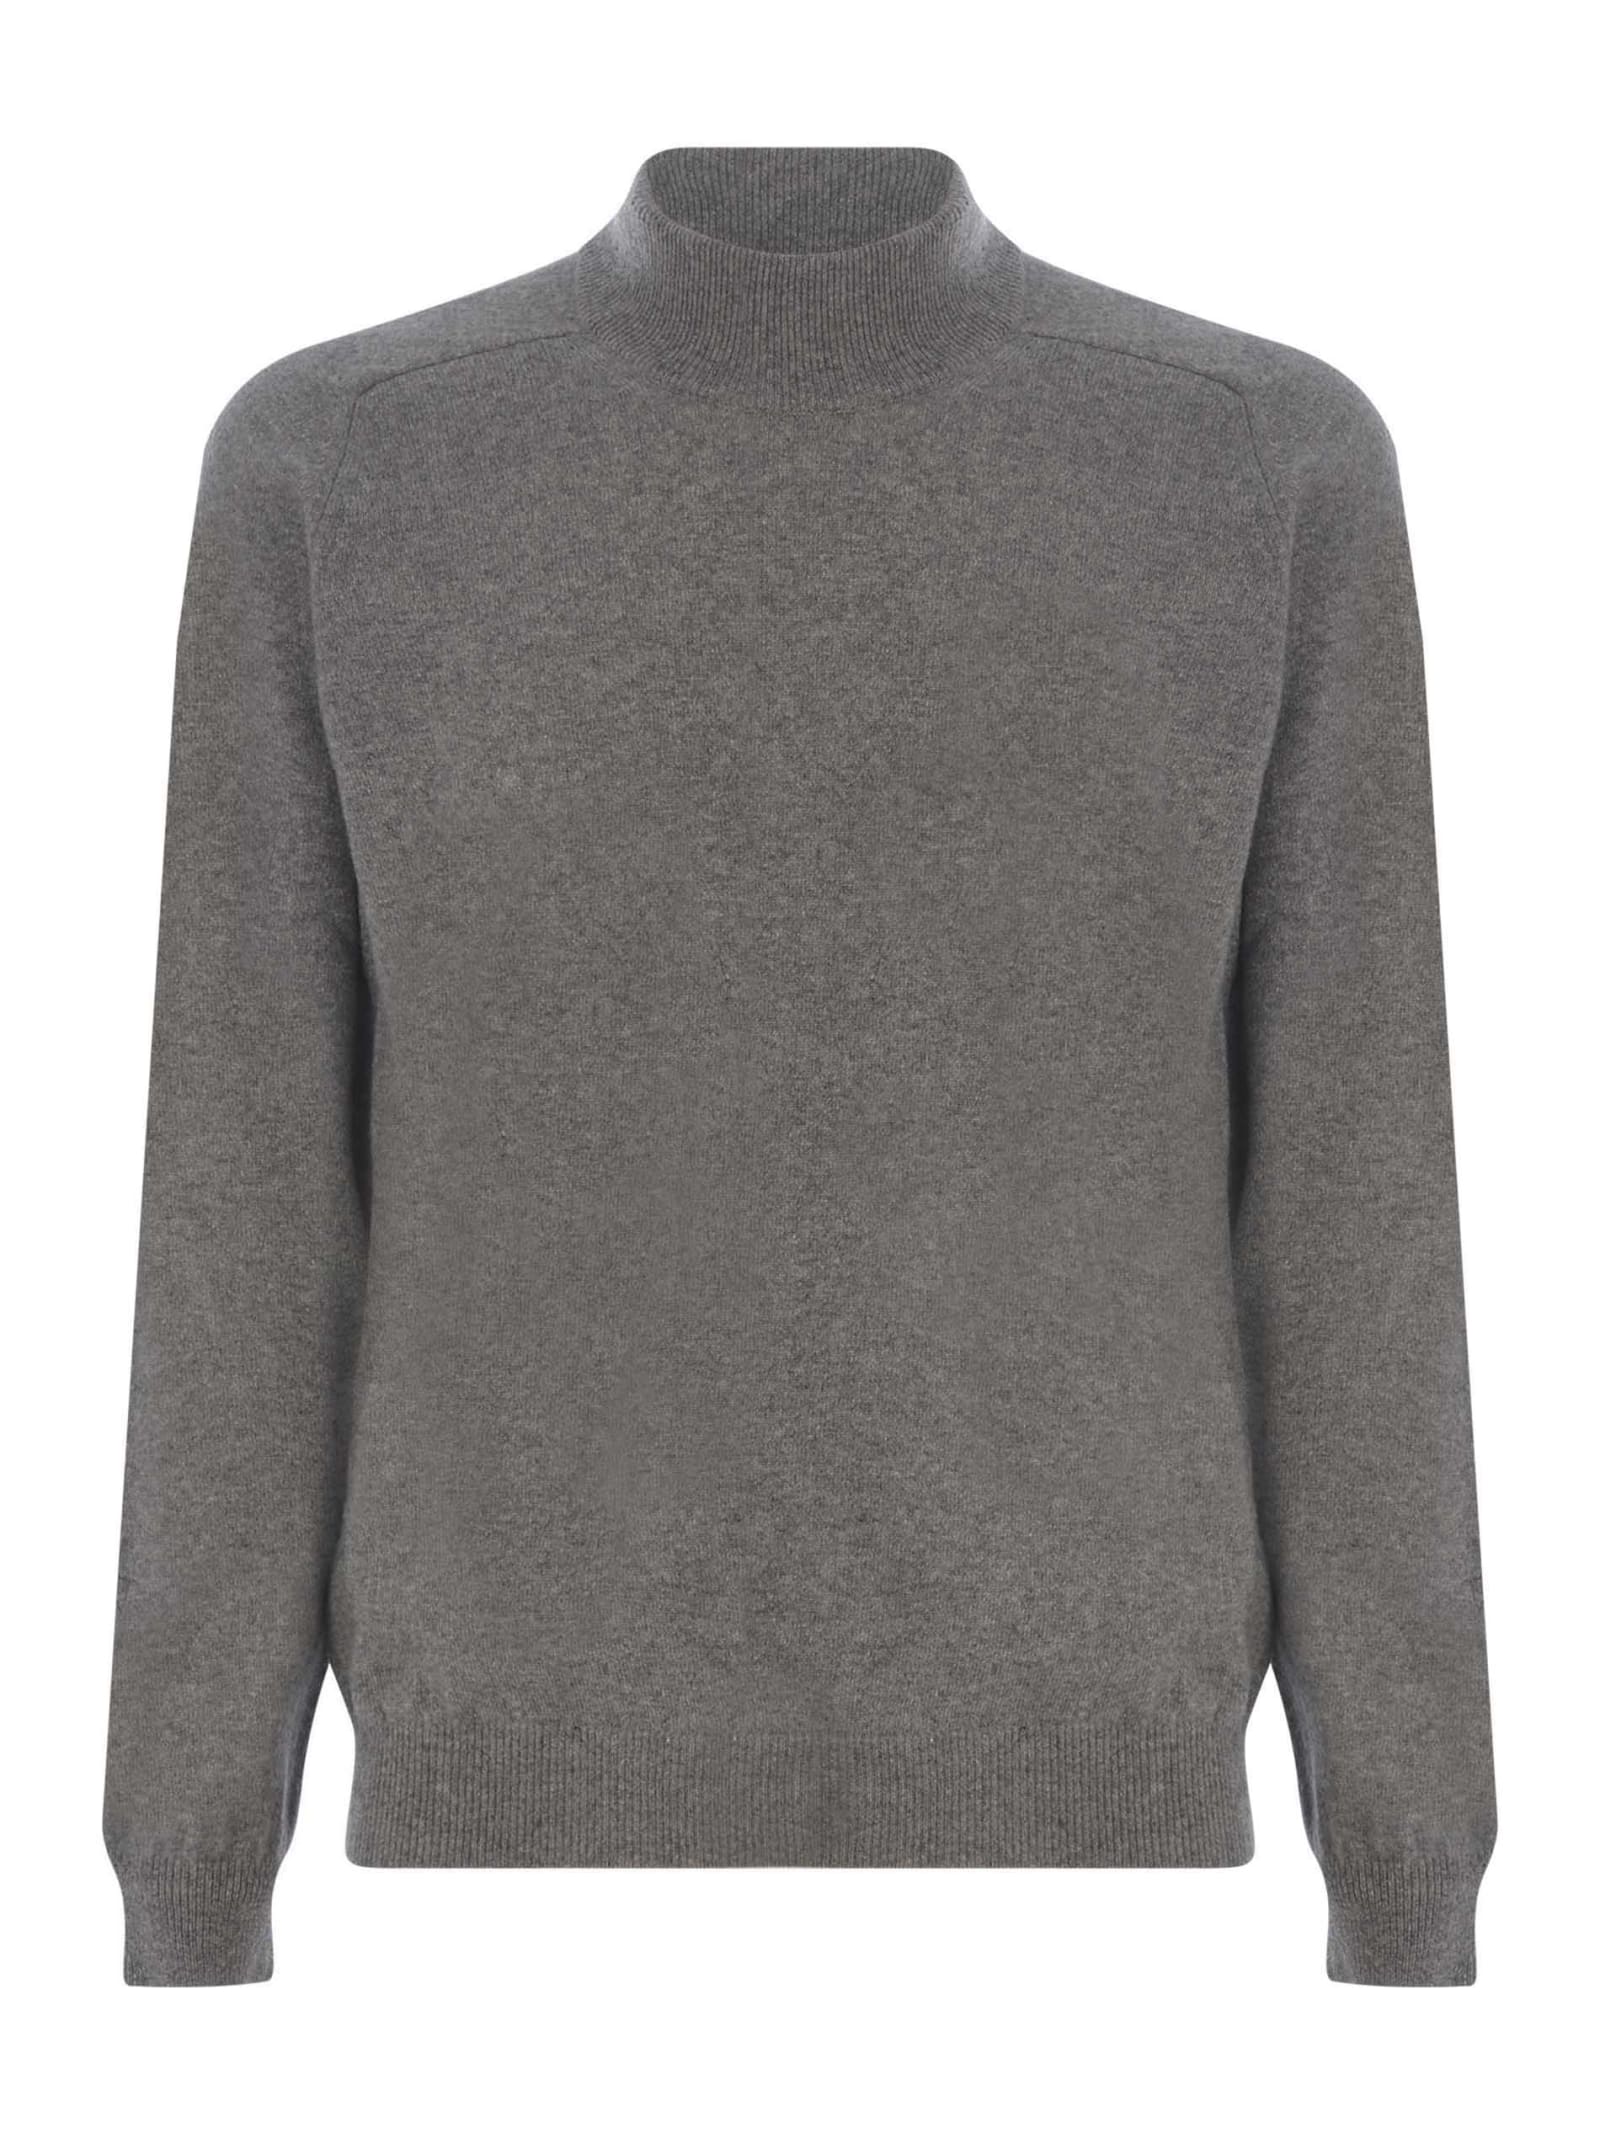 Shop Jeordie's Sweater Jeodies Made Of Extra Fine Wool In Grey